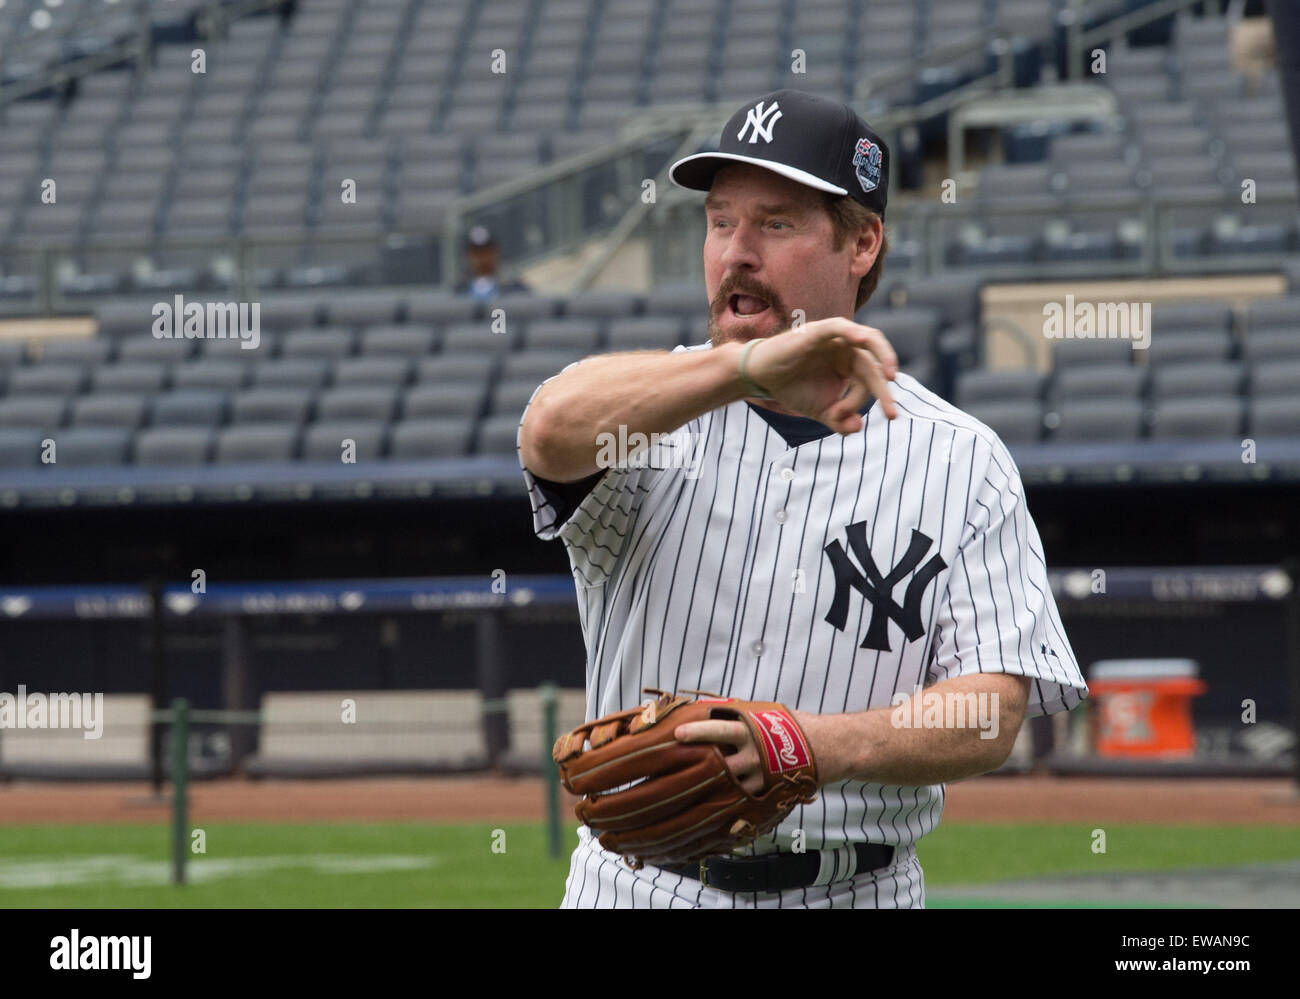 Photo: Wade Boggs Takes a Ride